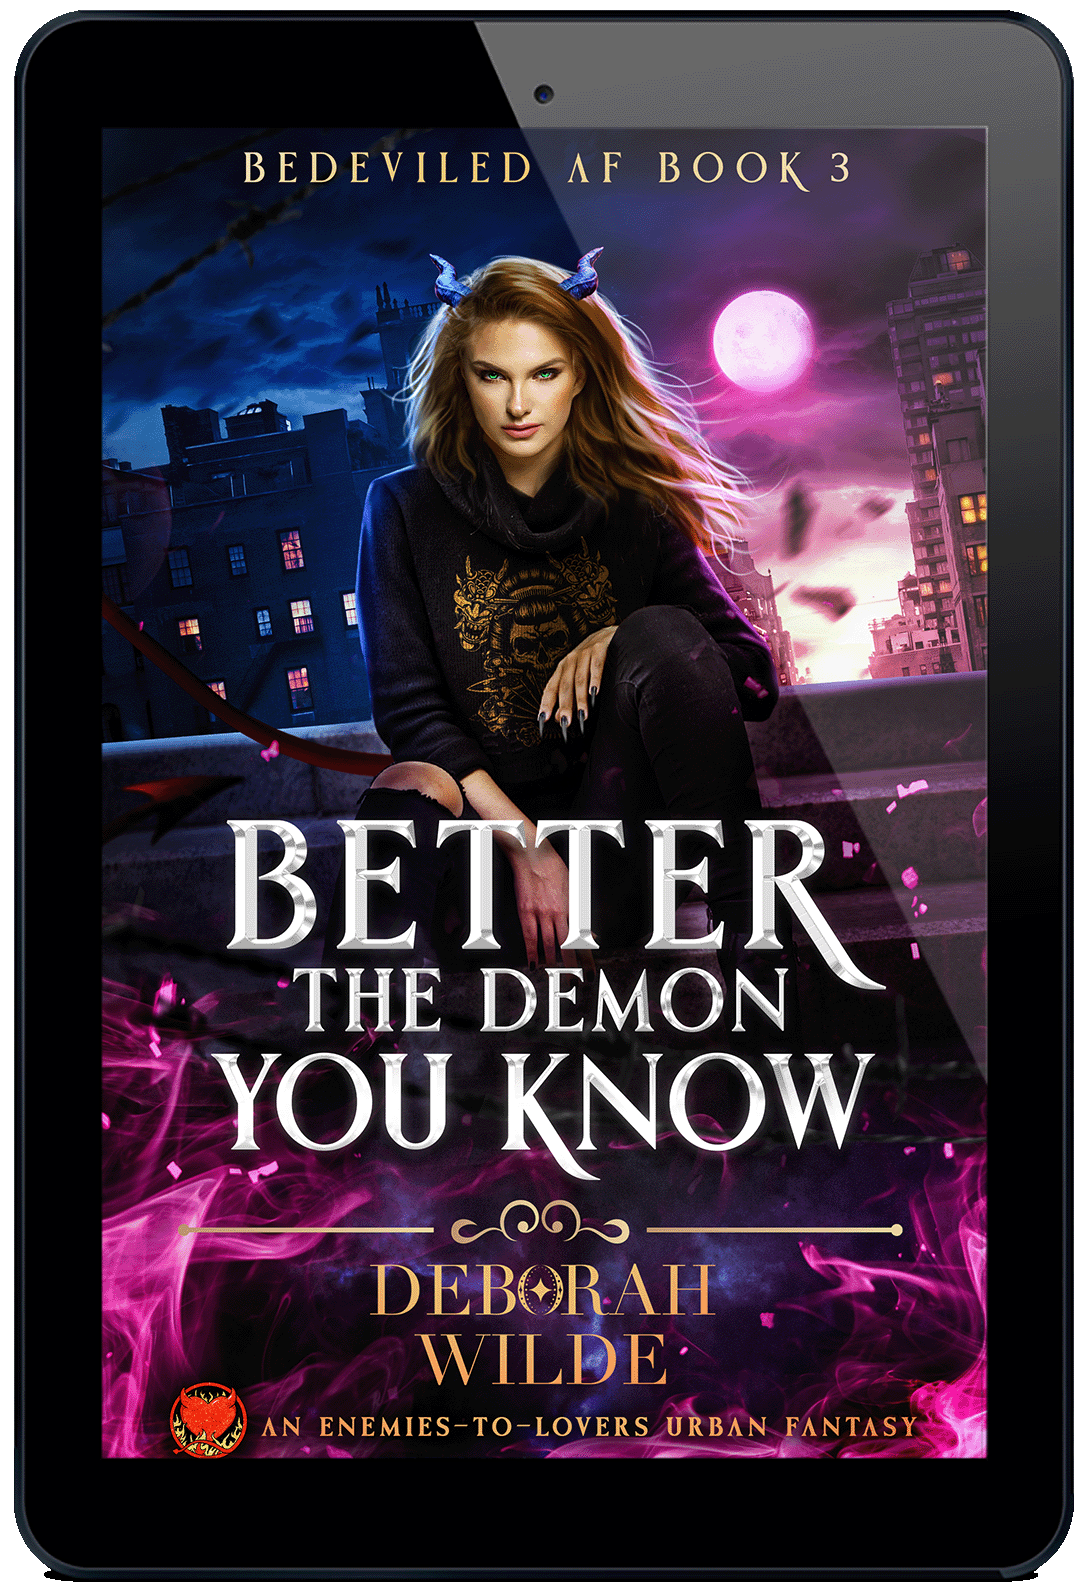 Better the Demon You Know, book 3 in the Bedeviled AF urban fantasy series by Deborah Wilde